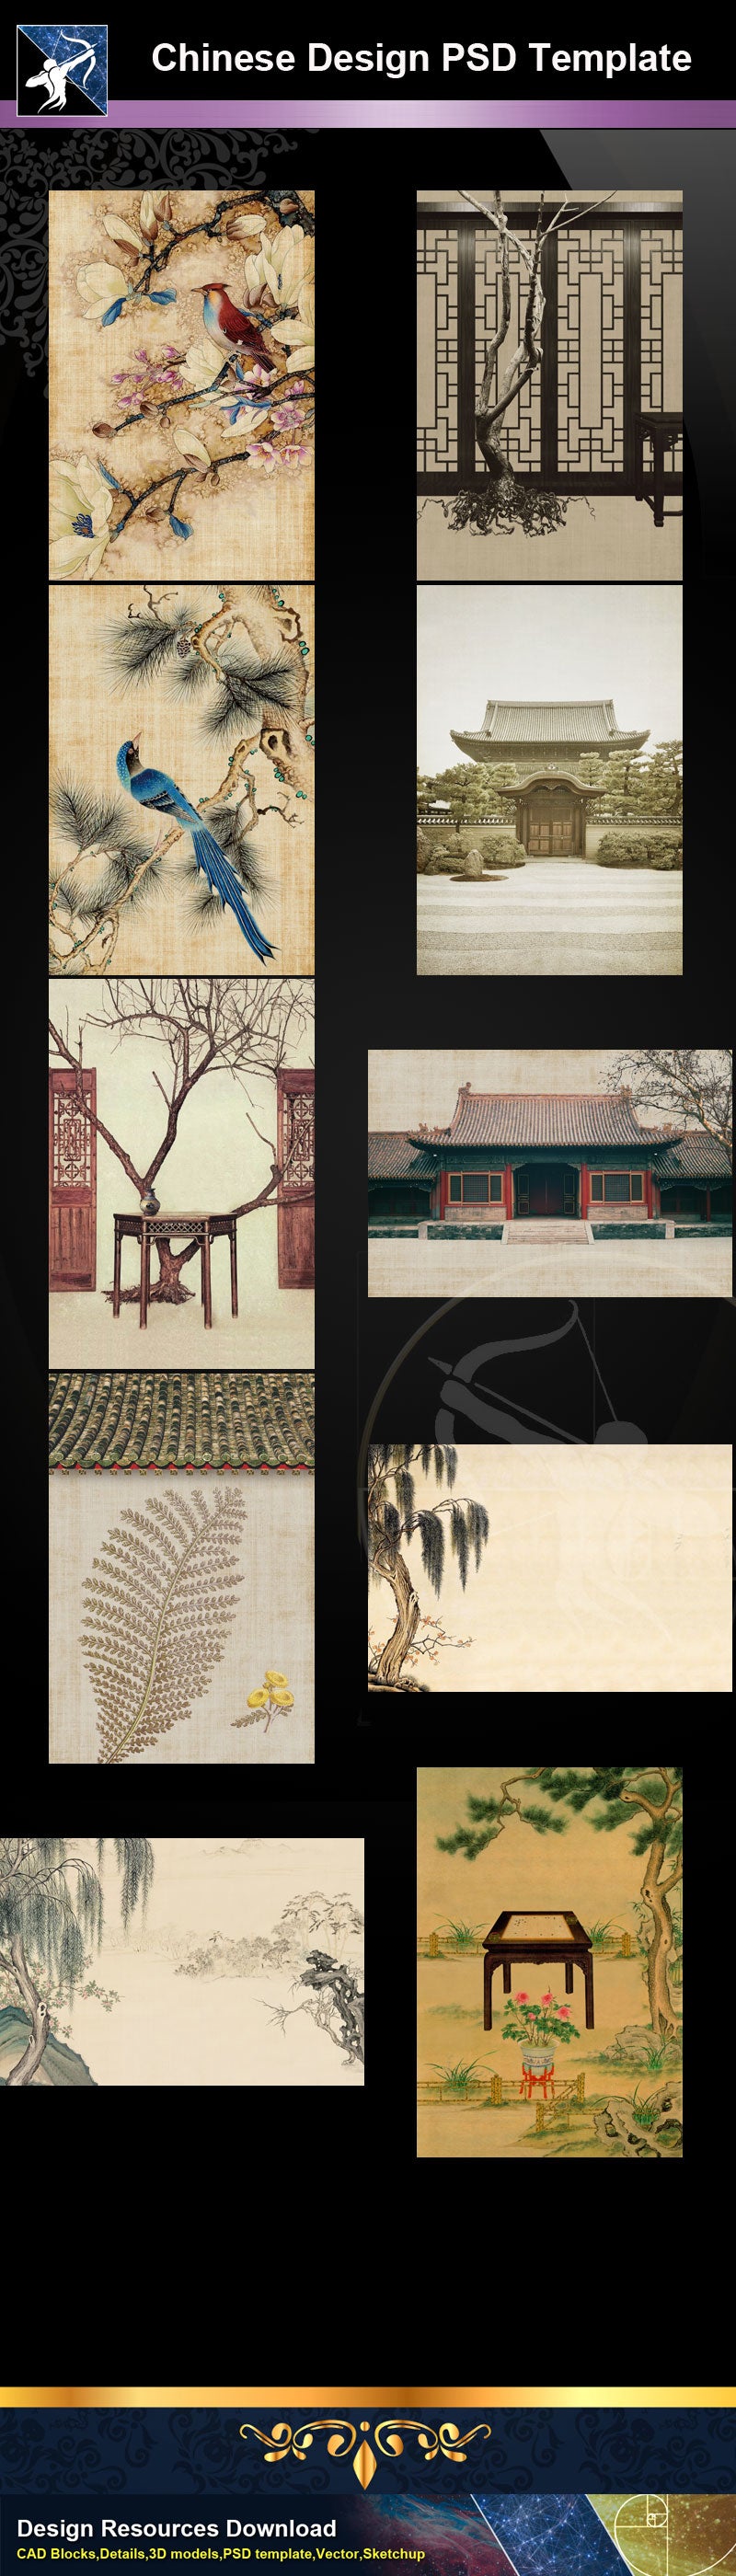 Photoshop PSD Chinese Design Templates “PSD” files can be used in chinese art design.